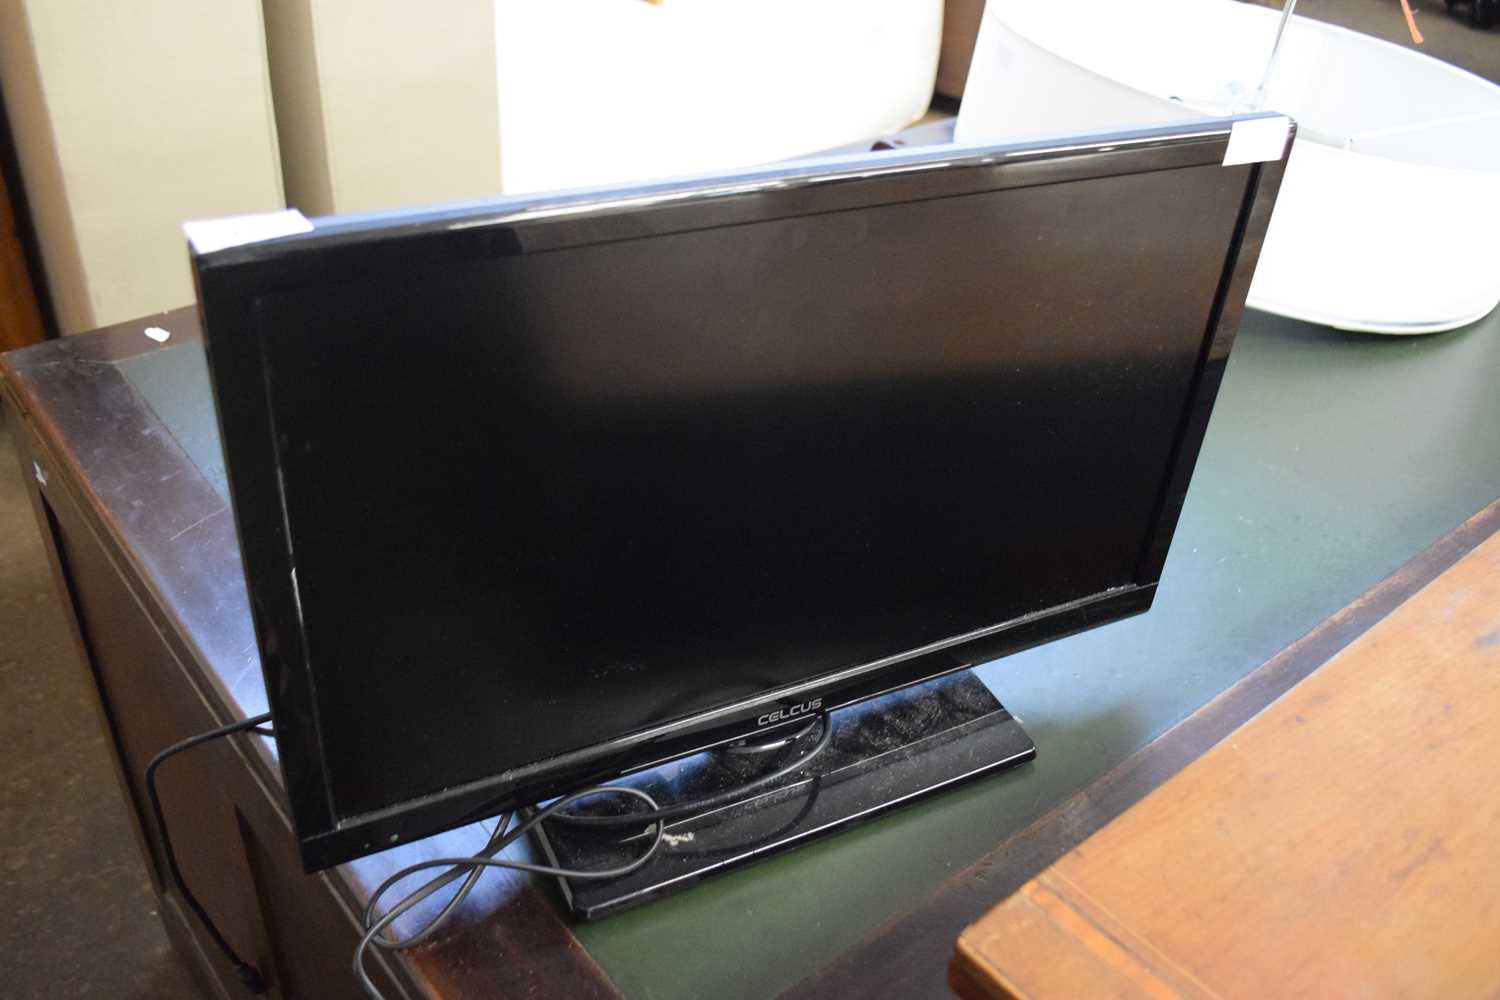 Celcus flat screen television